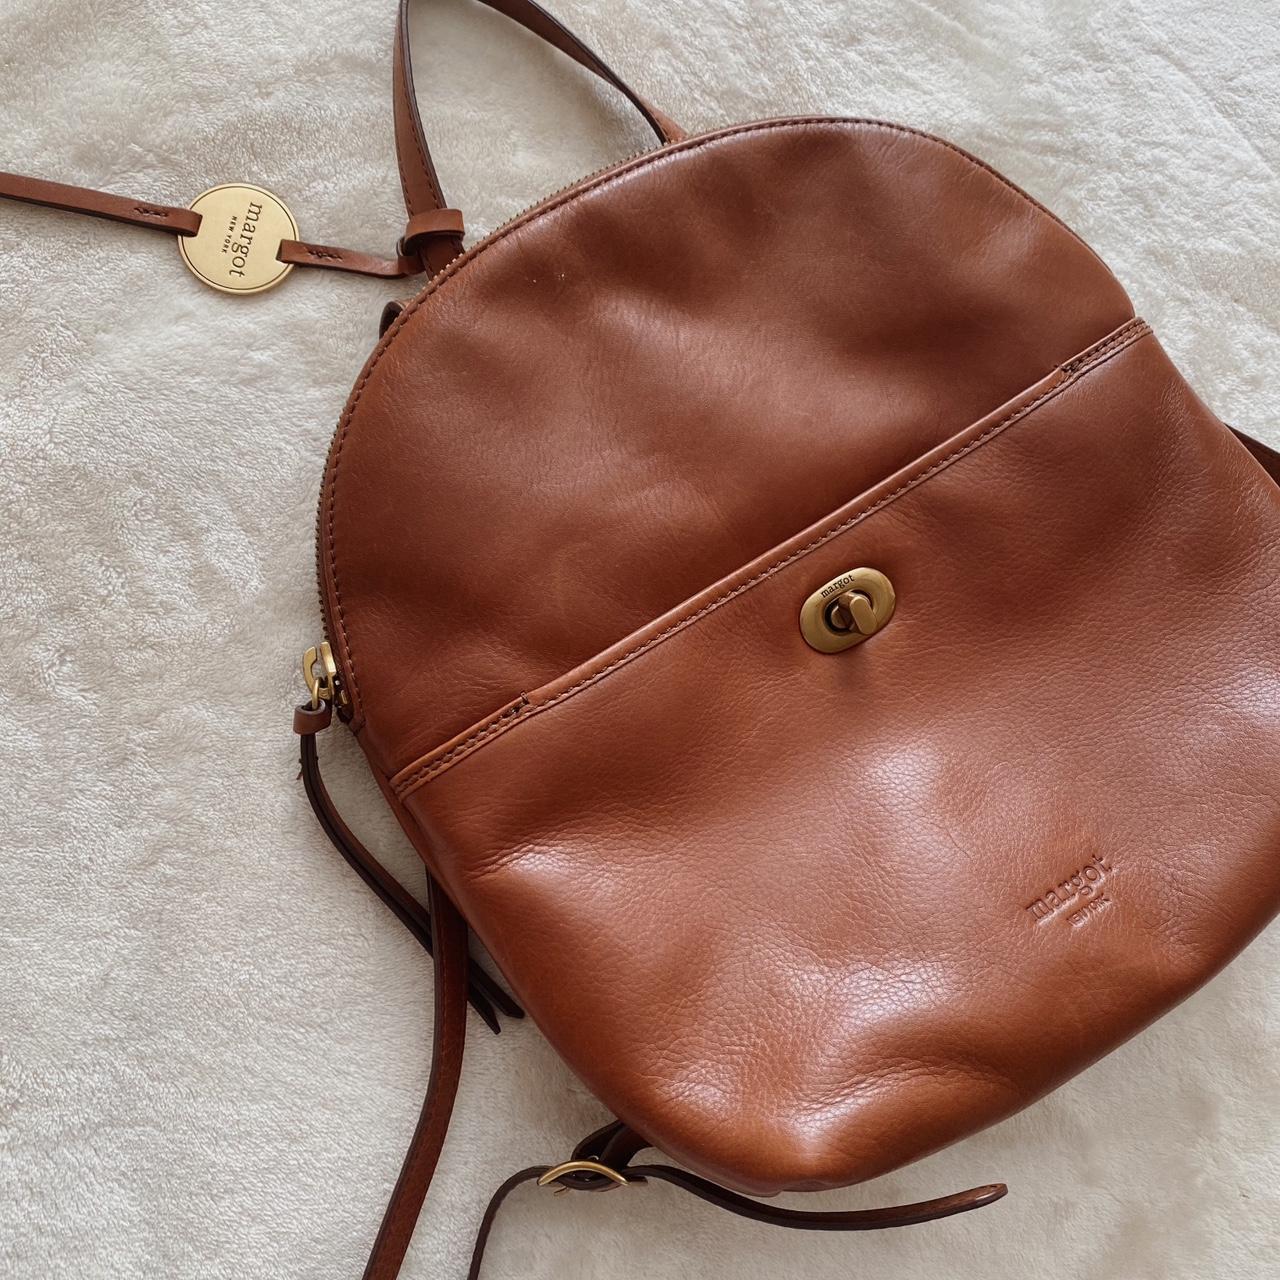 Brown Margot NY Backpack Leather material, - Depop